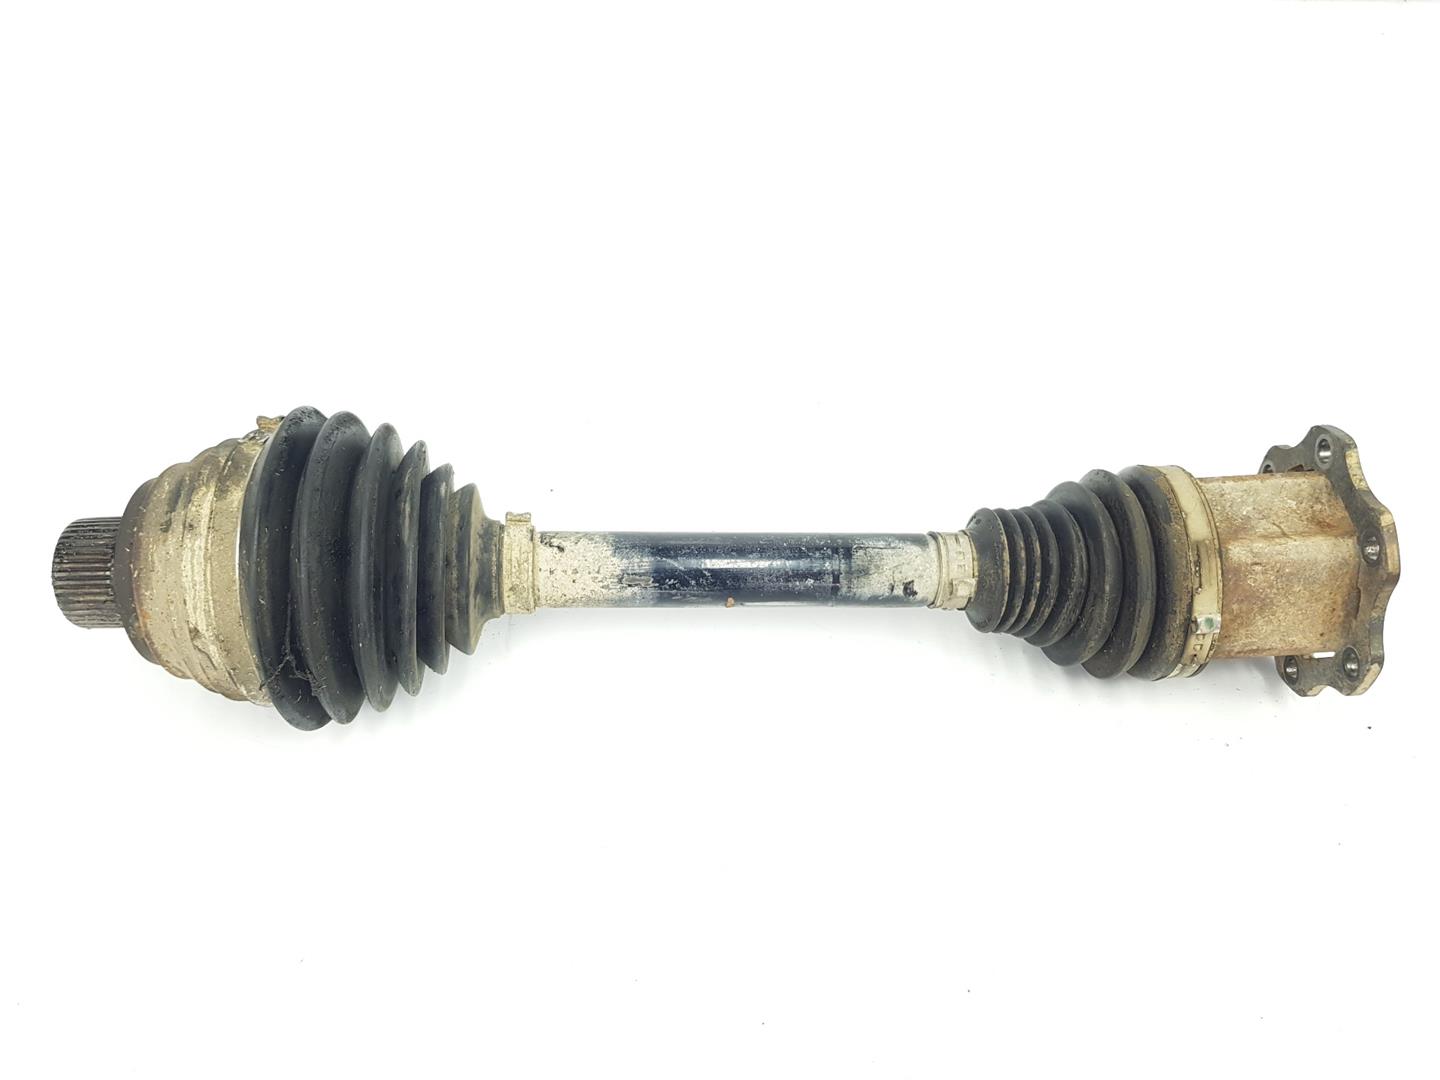 AUDI A6 C7/4G (2010-2020) Front Right Driveshaft 4G0407271A, 4G0407271A 24157080